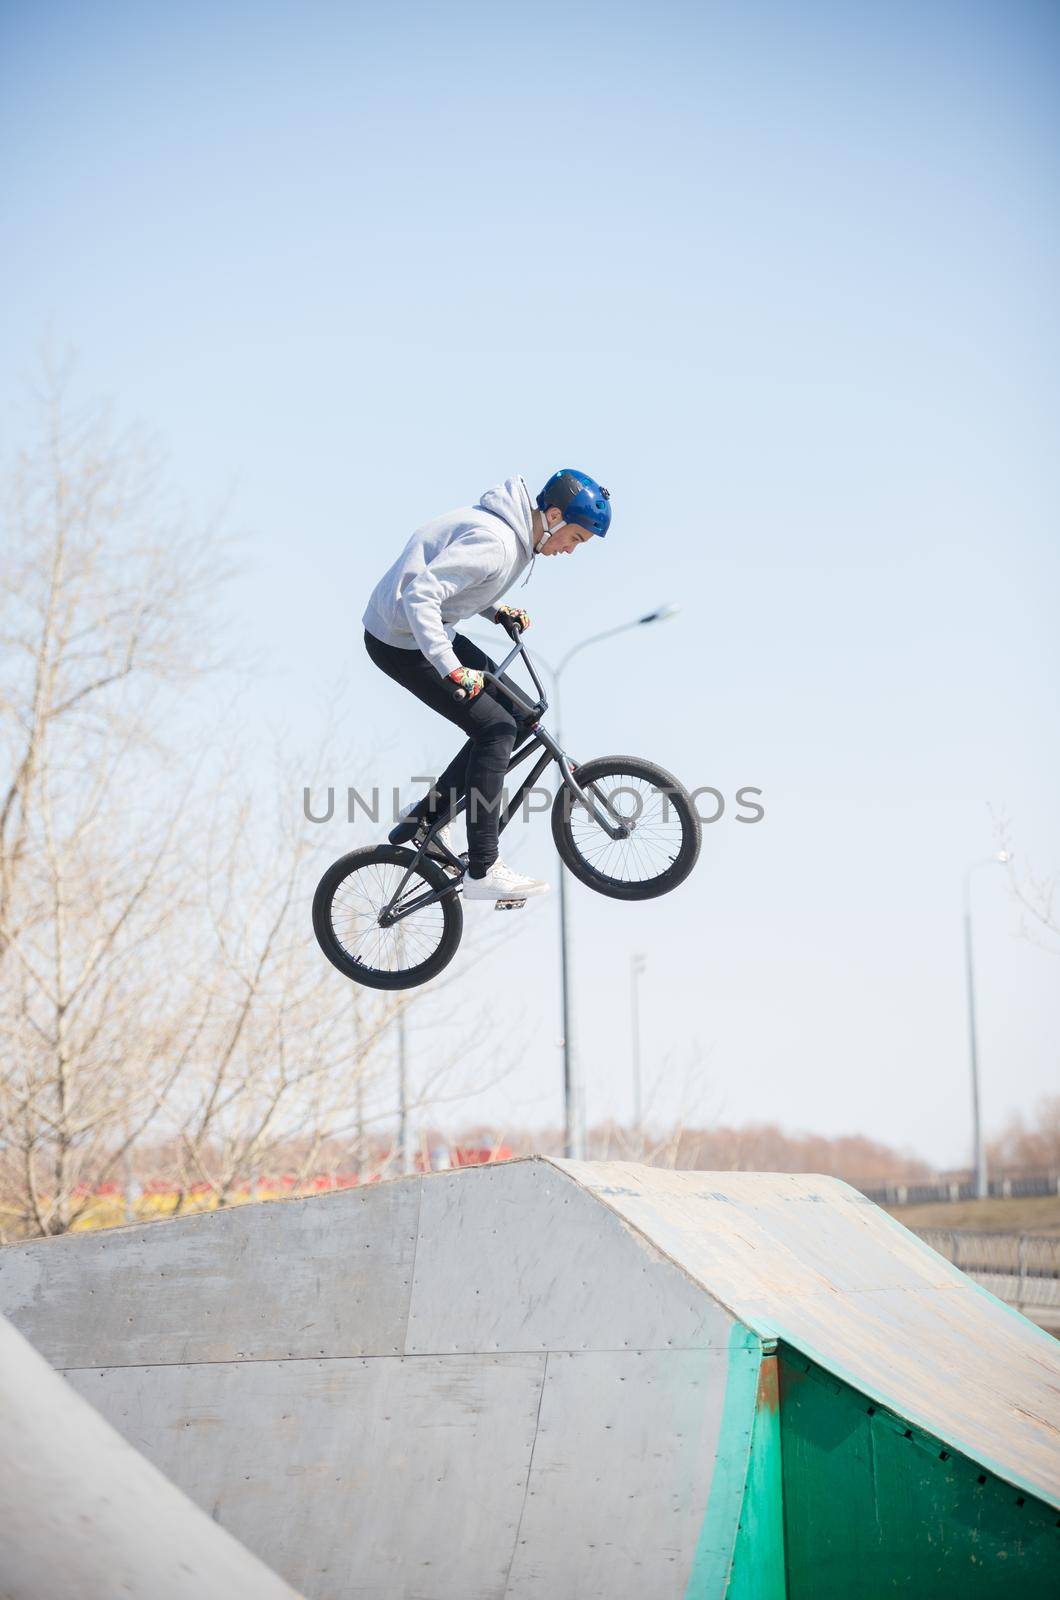 A bmx rider in the skatepark in the air. Daylight by Studia72